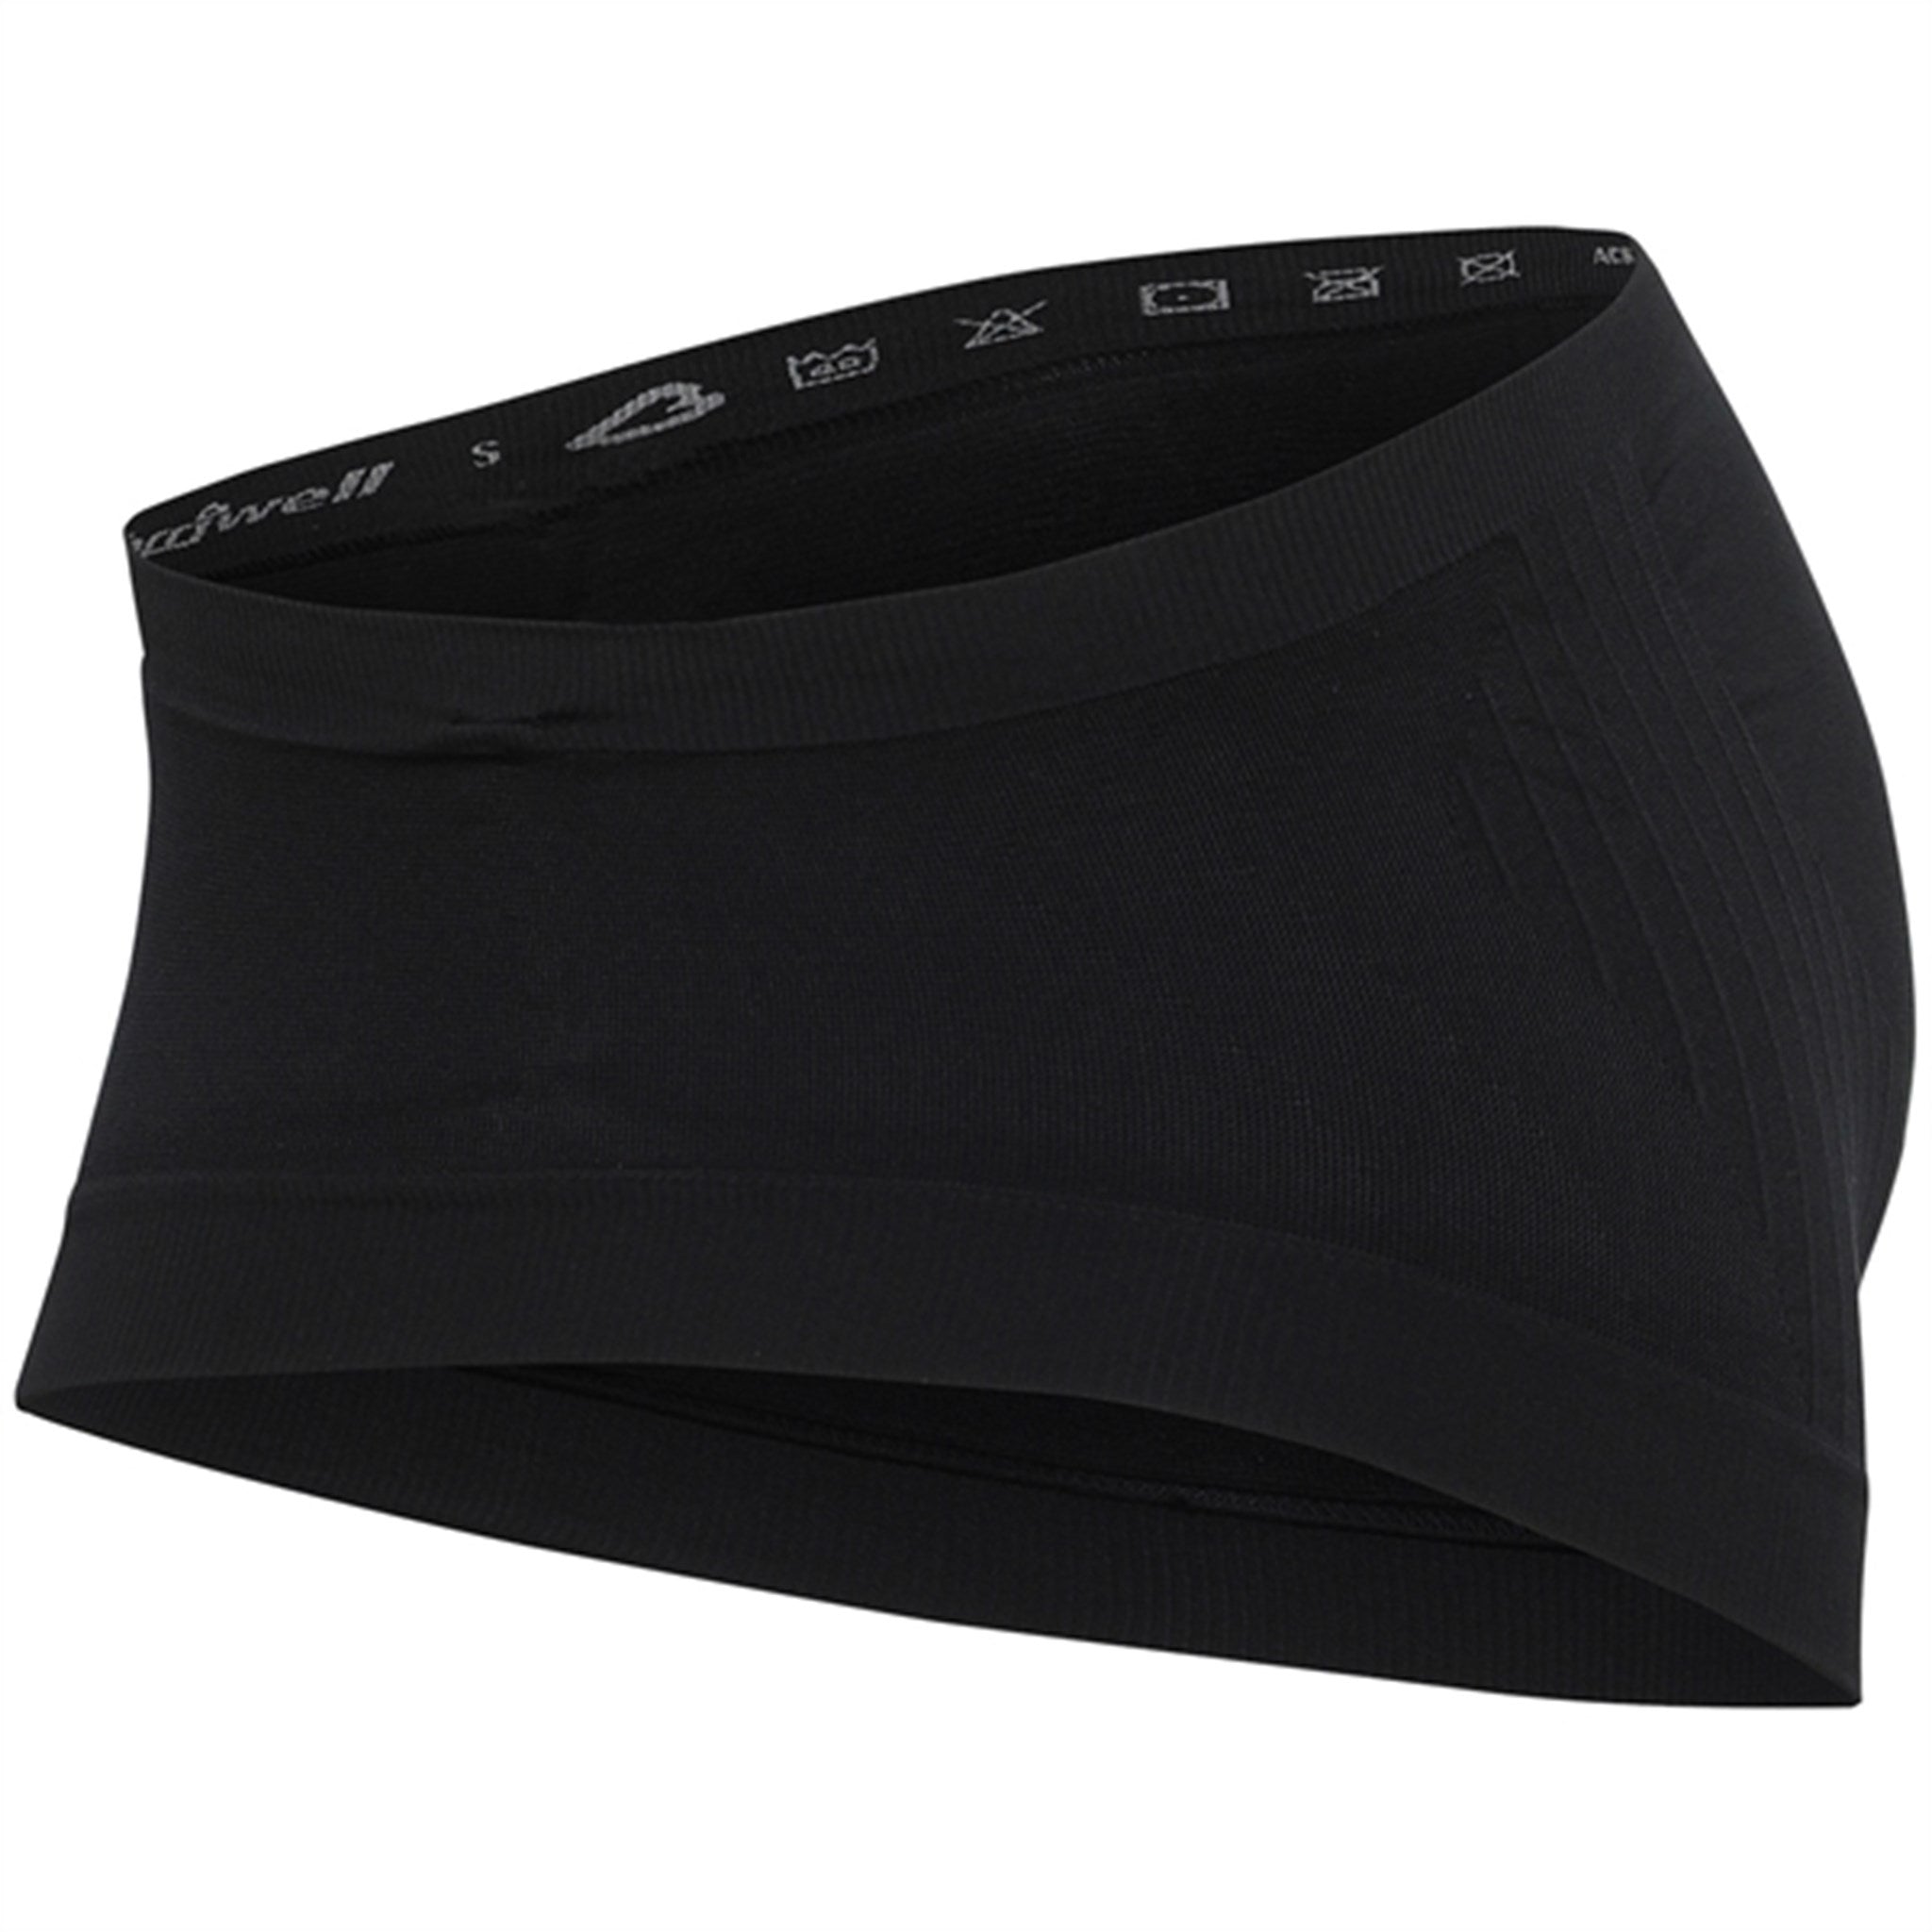 Carriwell Maternity Support Band Black 2